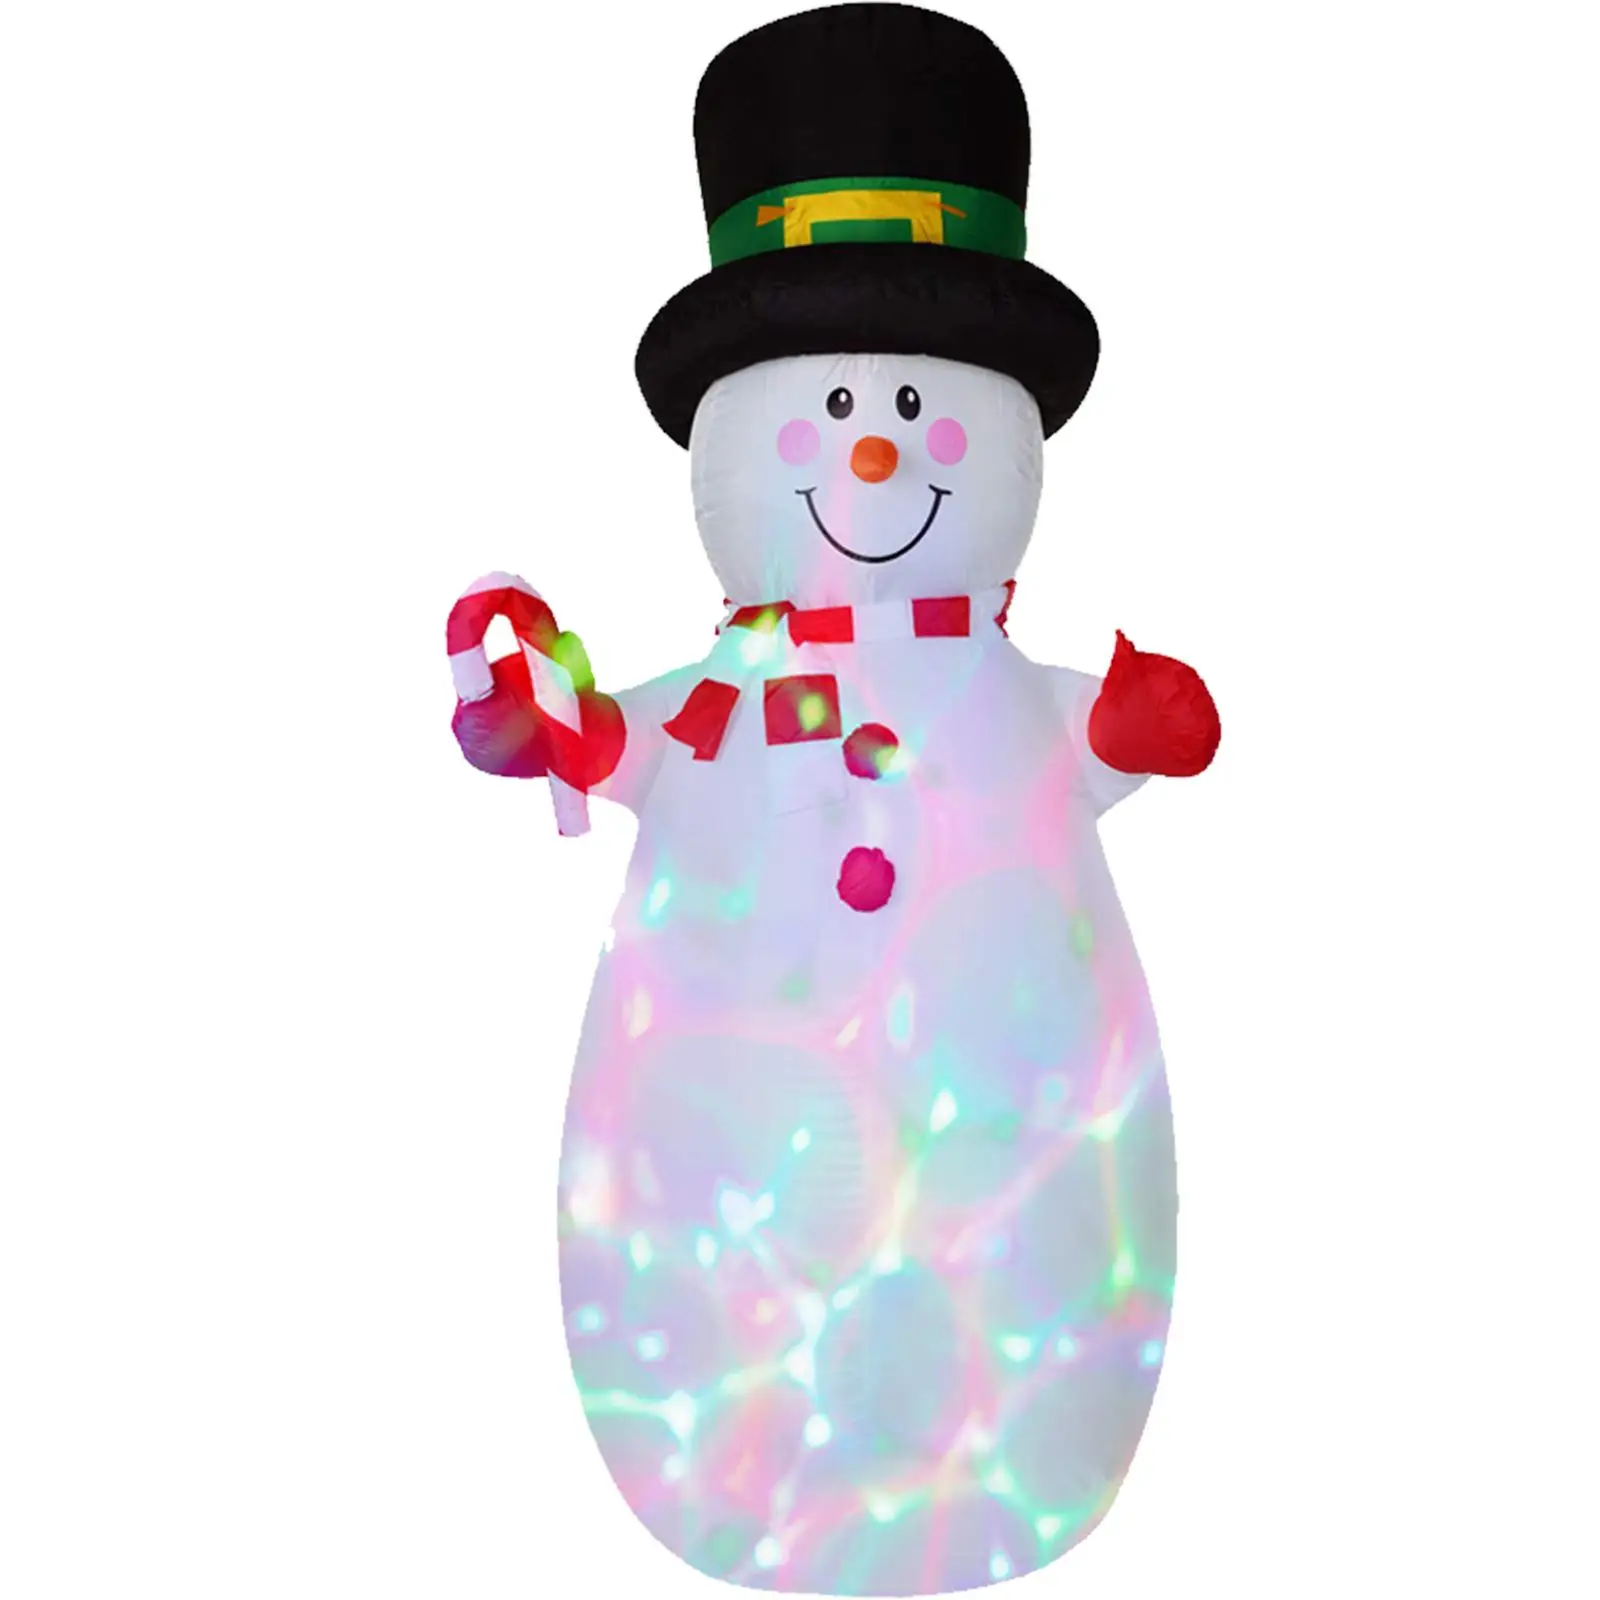 6ft Xmas Inflatable Snowman with Stakes Holiday Inflatable Snowman for Party Yard Garden Outdoor